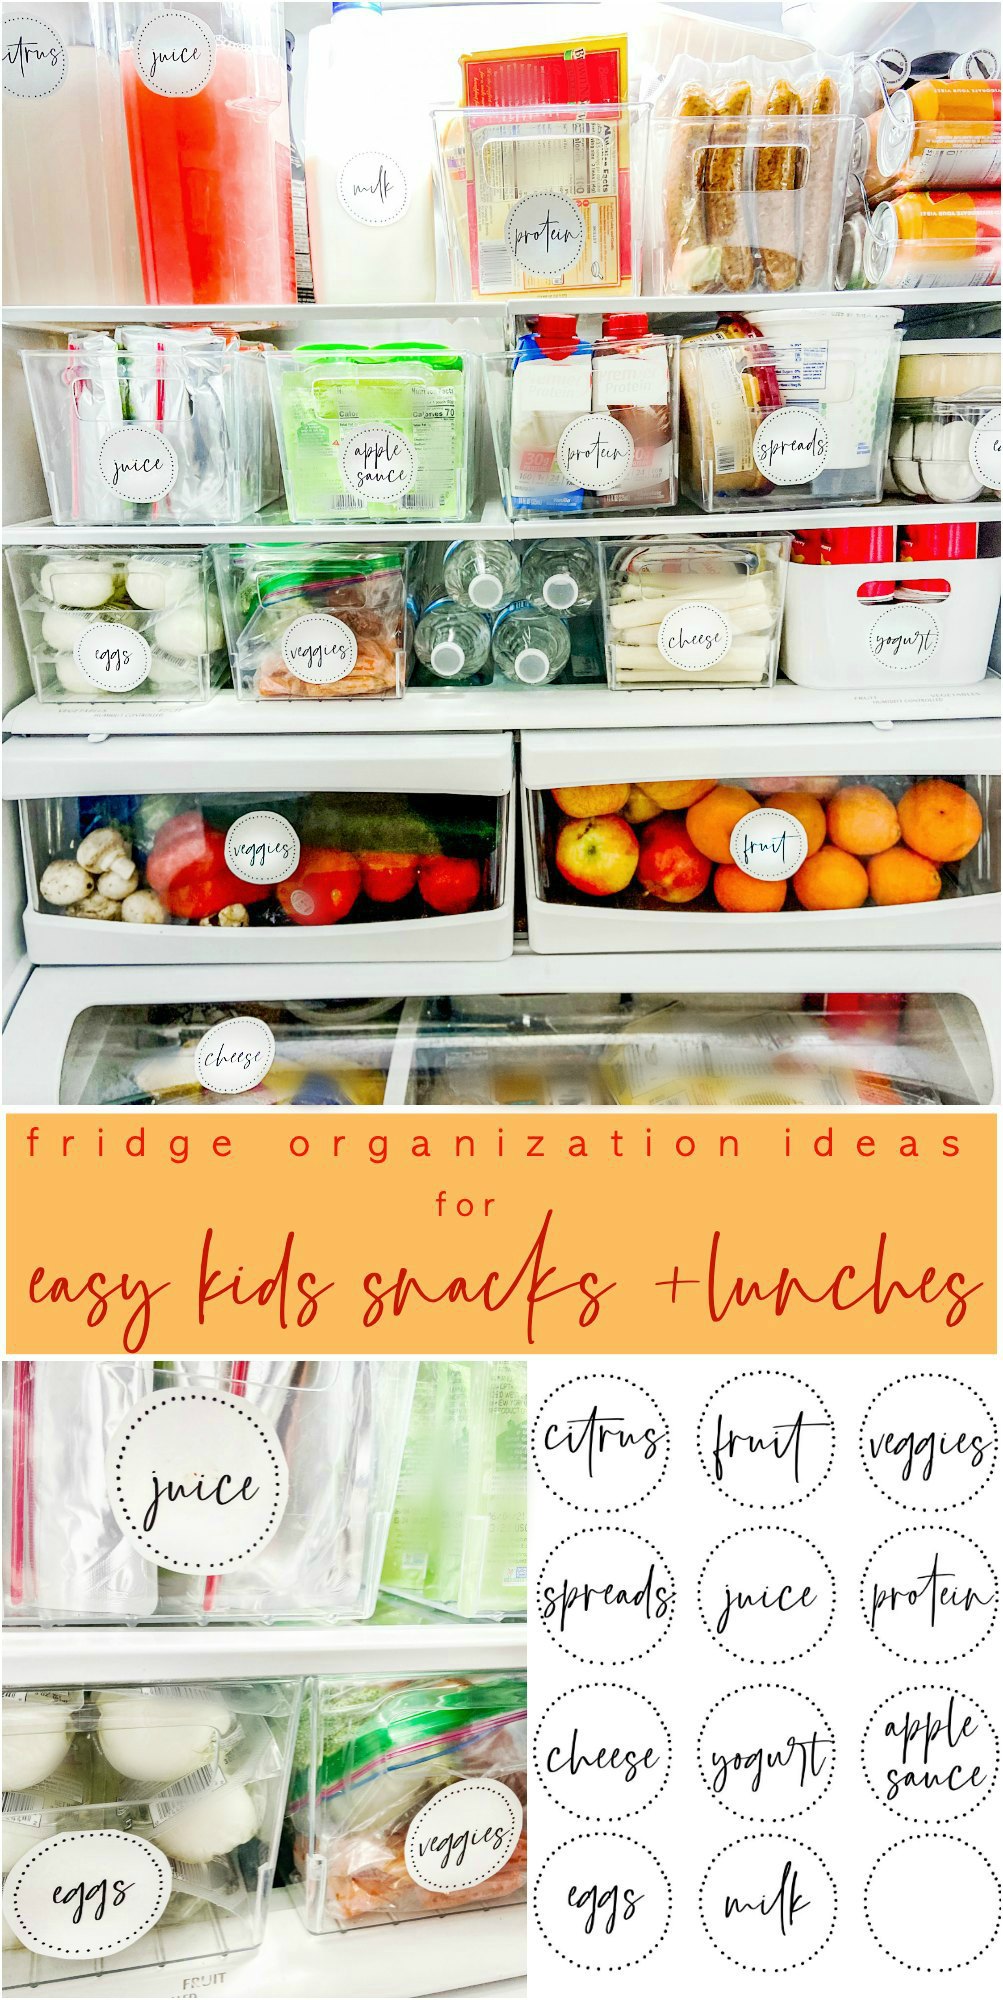 Easy Kids' Grab-and-Go Snacks and Lunches! With kids home more, here are some easy ways for them to grab healthy snacks and lunches with no fuss!